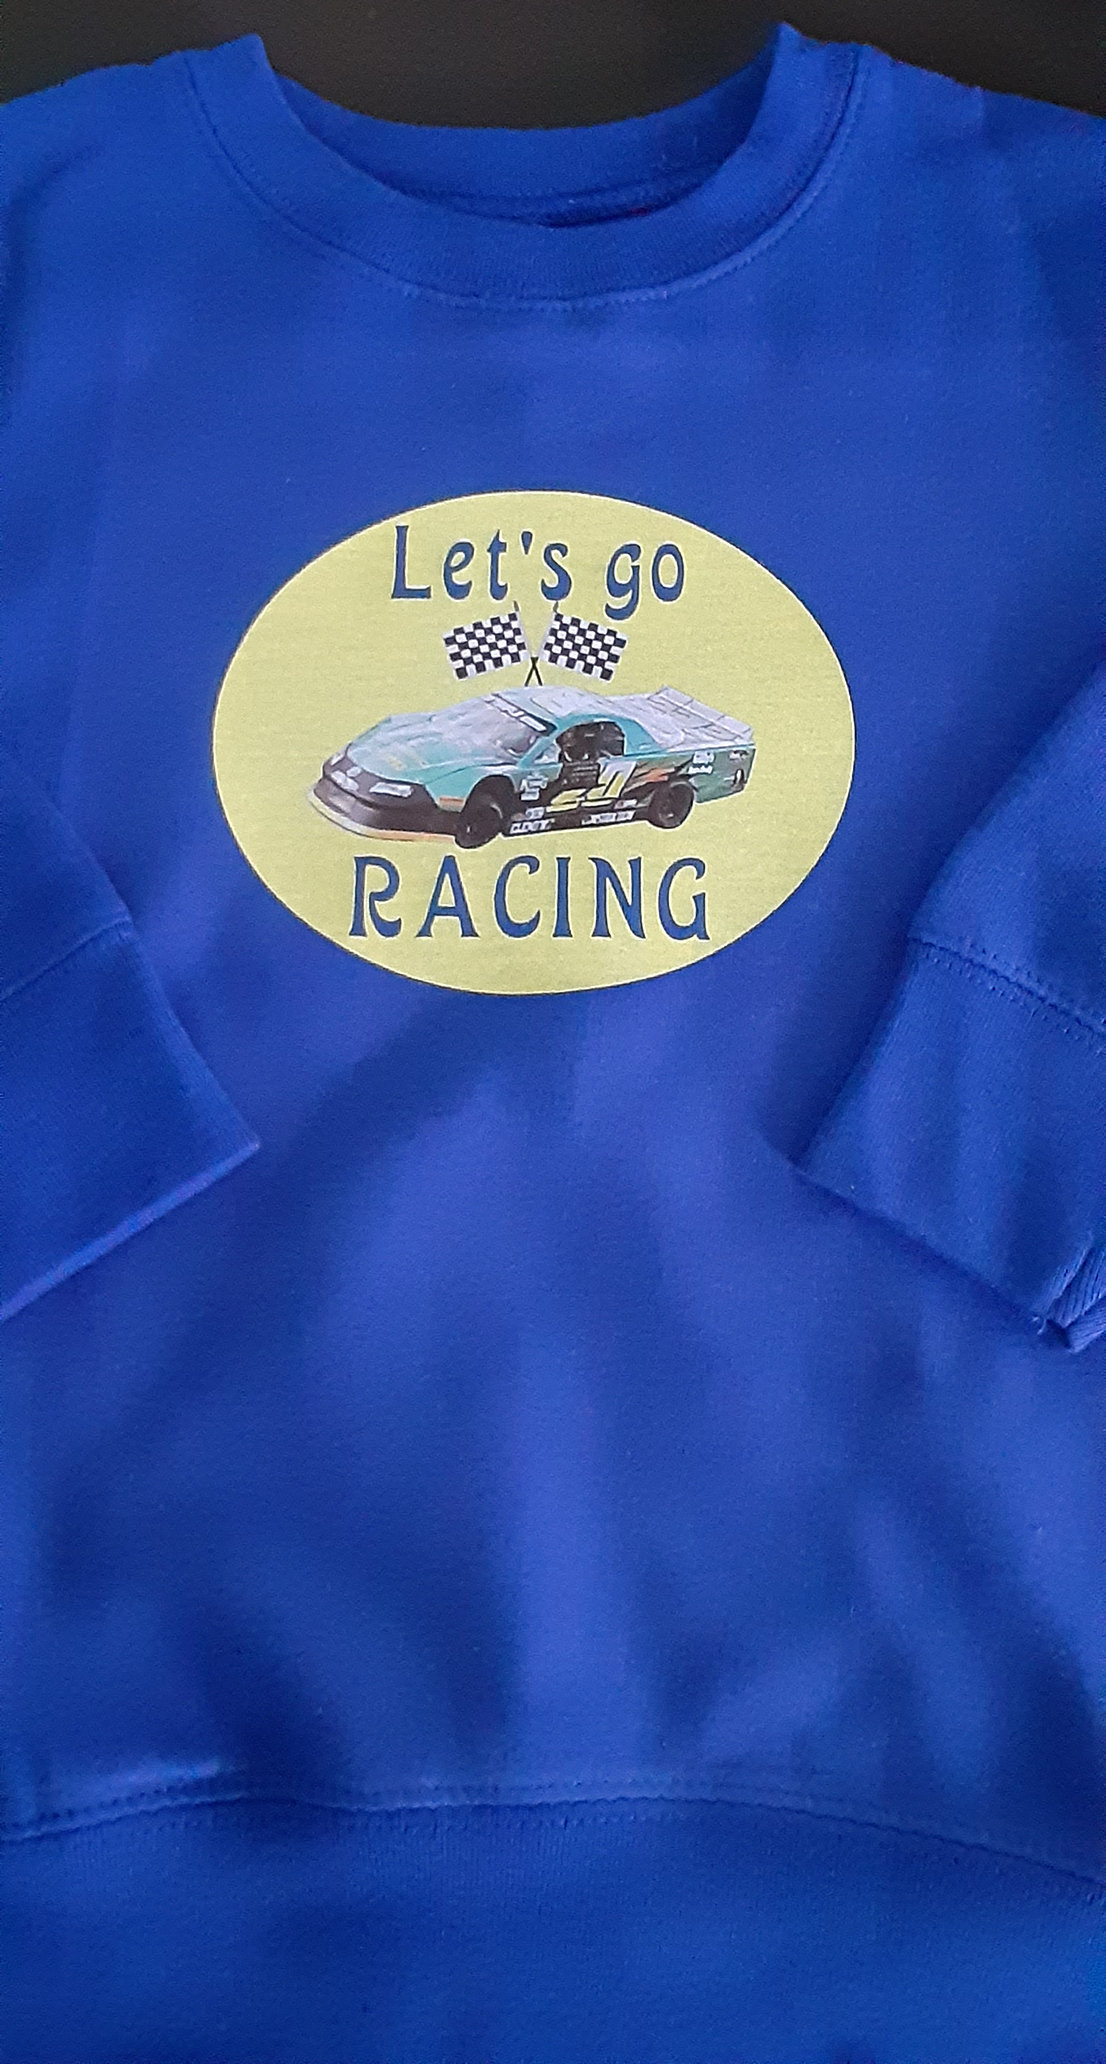 Lets Go Racing made with sublimation printing